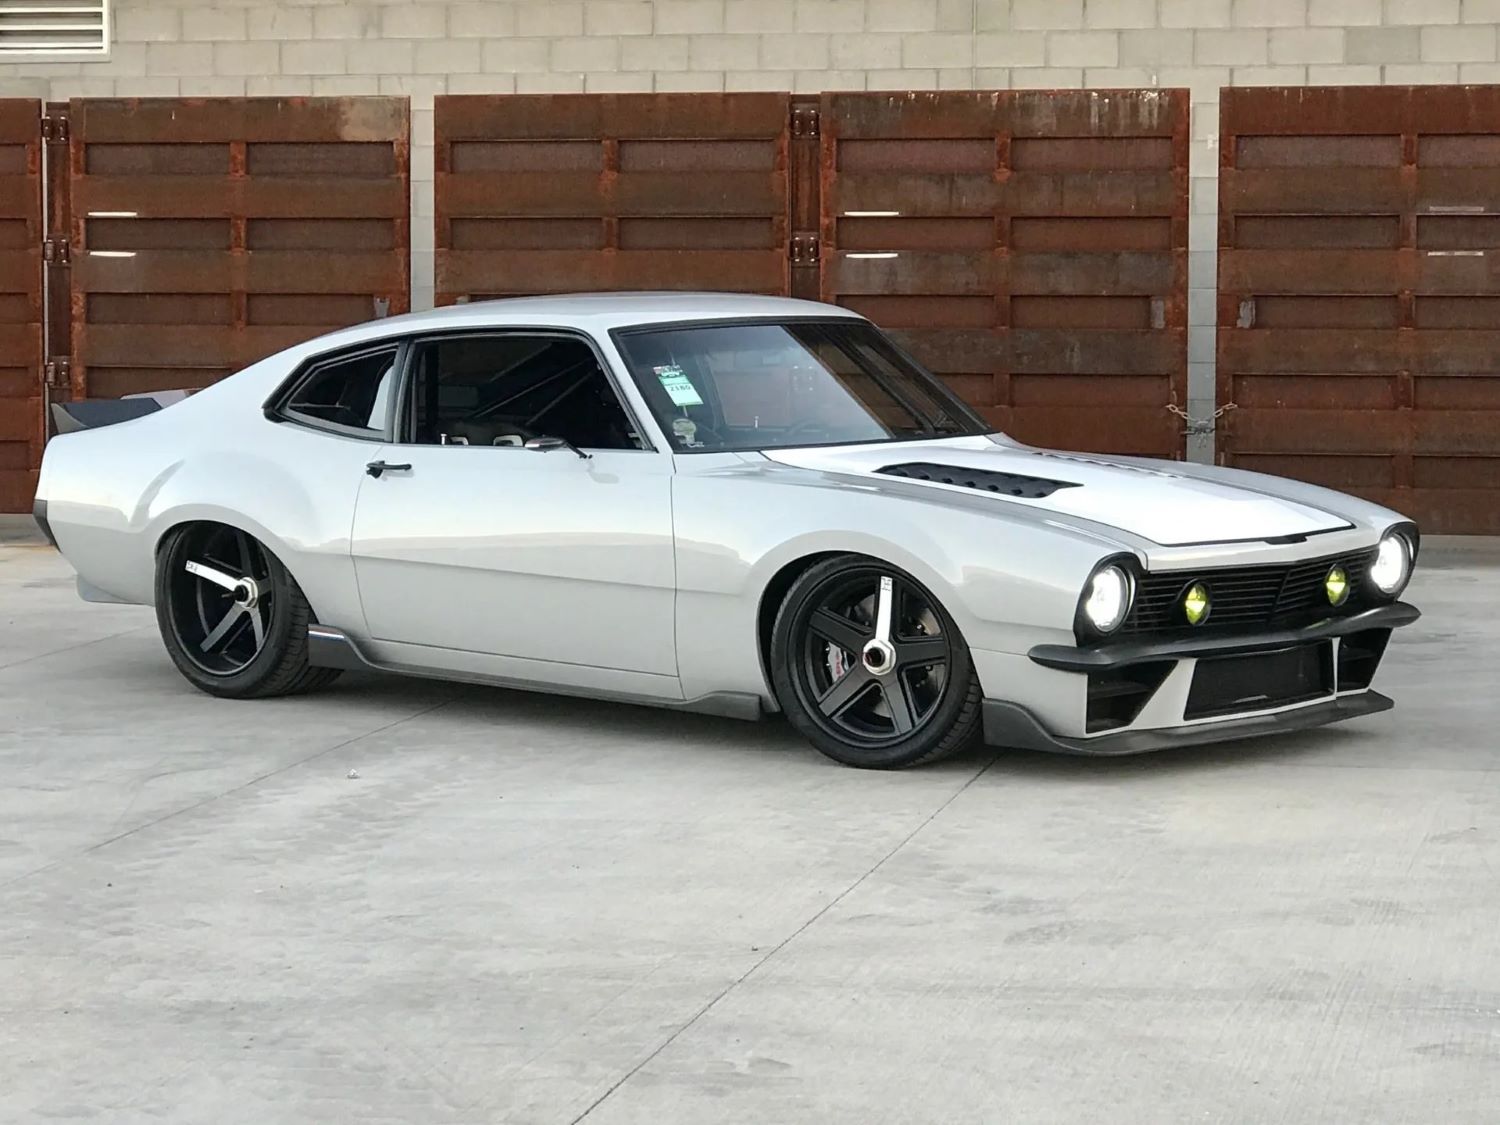 Wicked Twin Turbo 1971 Ford Maverick Was Built To Top 200 Mph